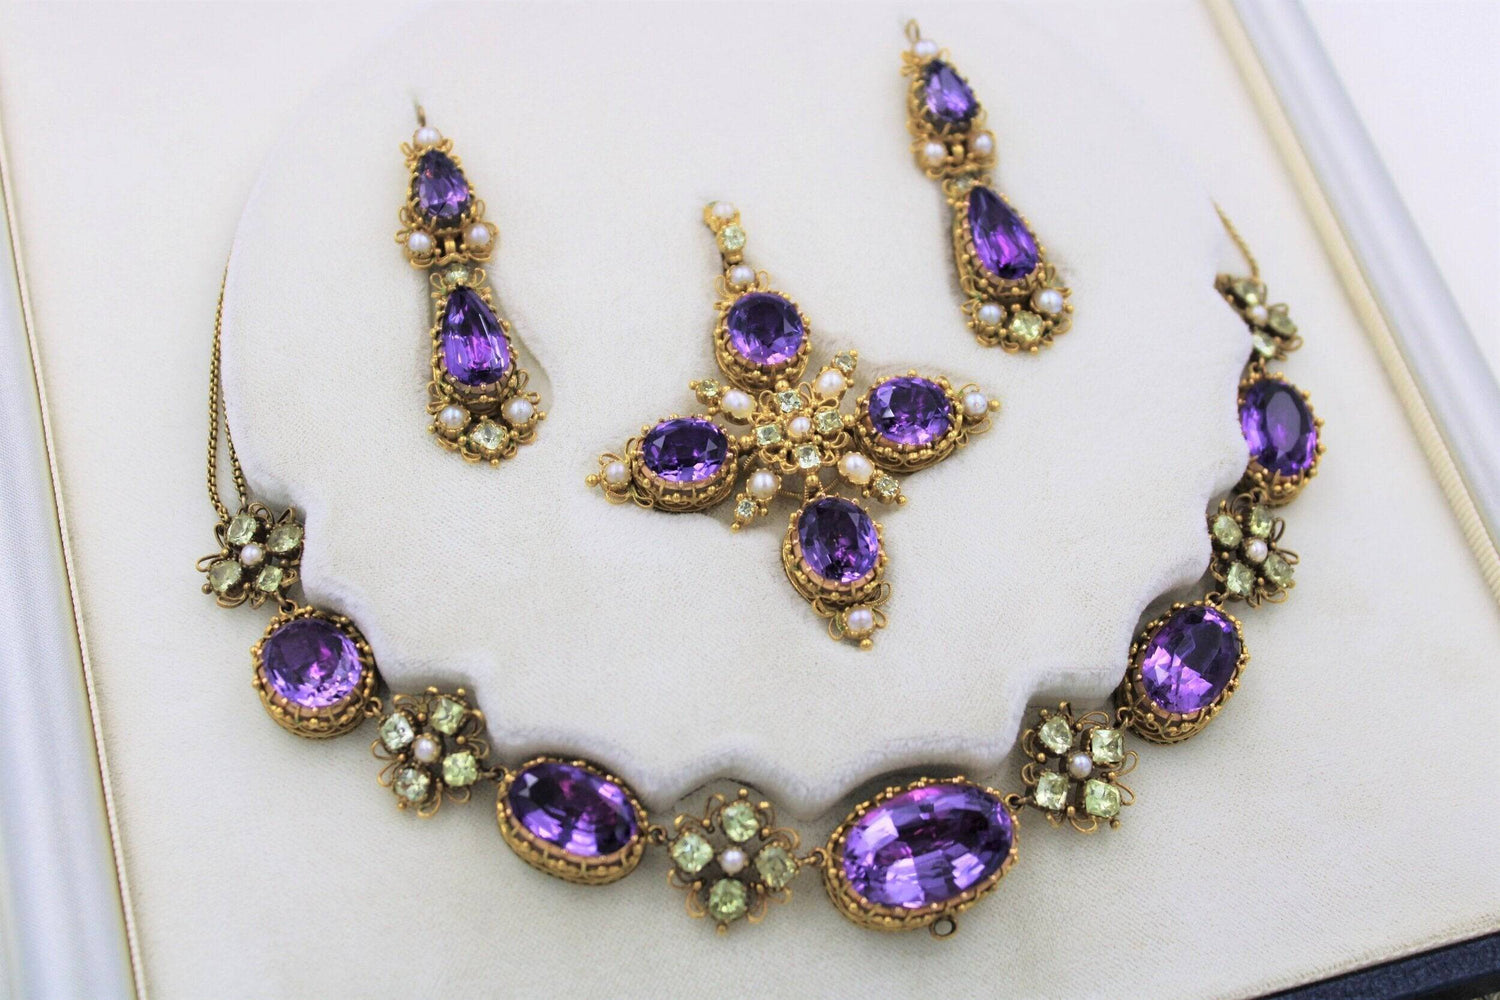 An exceptional example of a late Georgian Demi-Parure in High Carat Yellow Gold set with Amethysts, Seed Pearls and Chrysoberyl, English, Circa 1820 - Robin Haydock Antiques